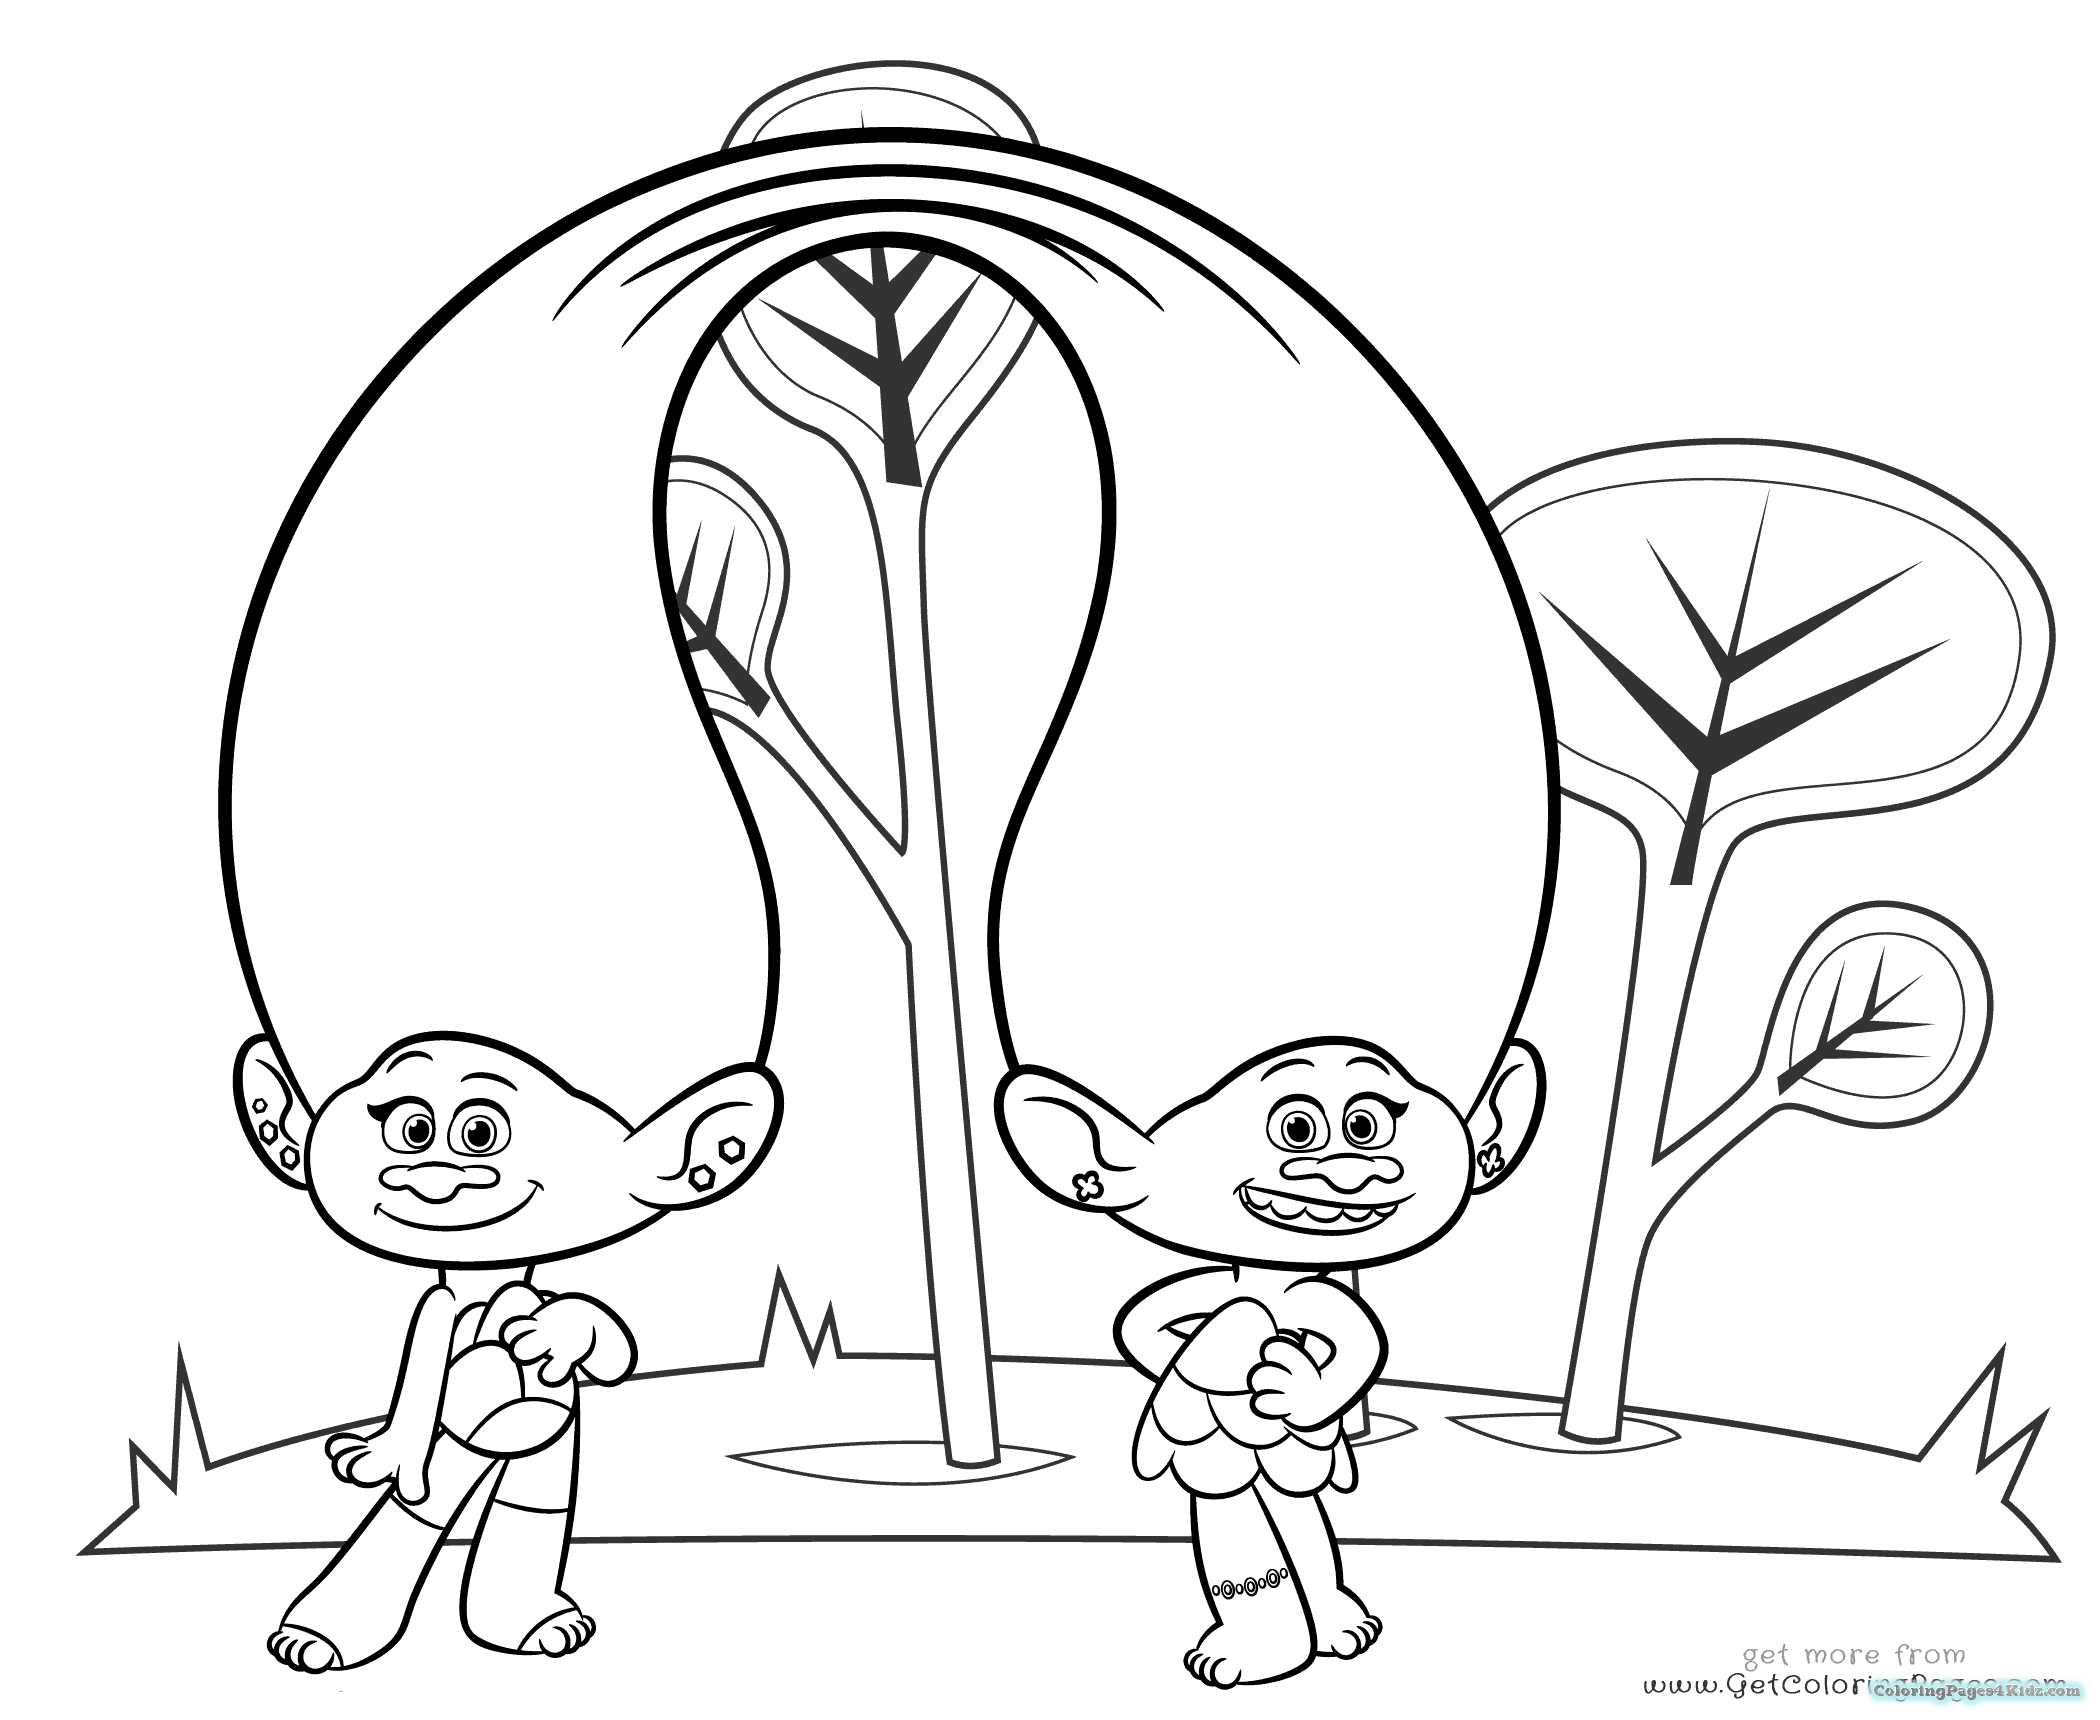 Trolls Movie Coloring Pages Trolls Movie Free Coloring Pages At Getdrawings Free For